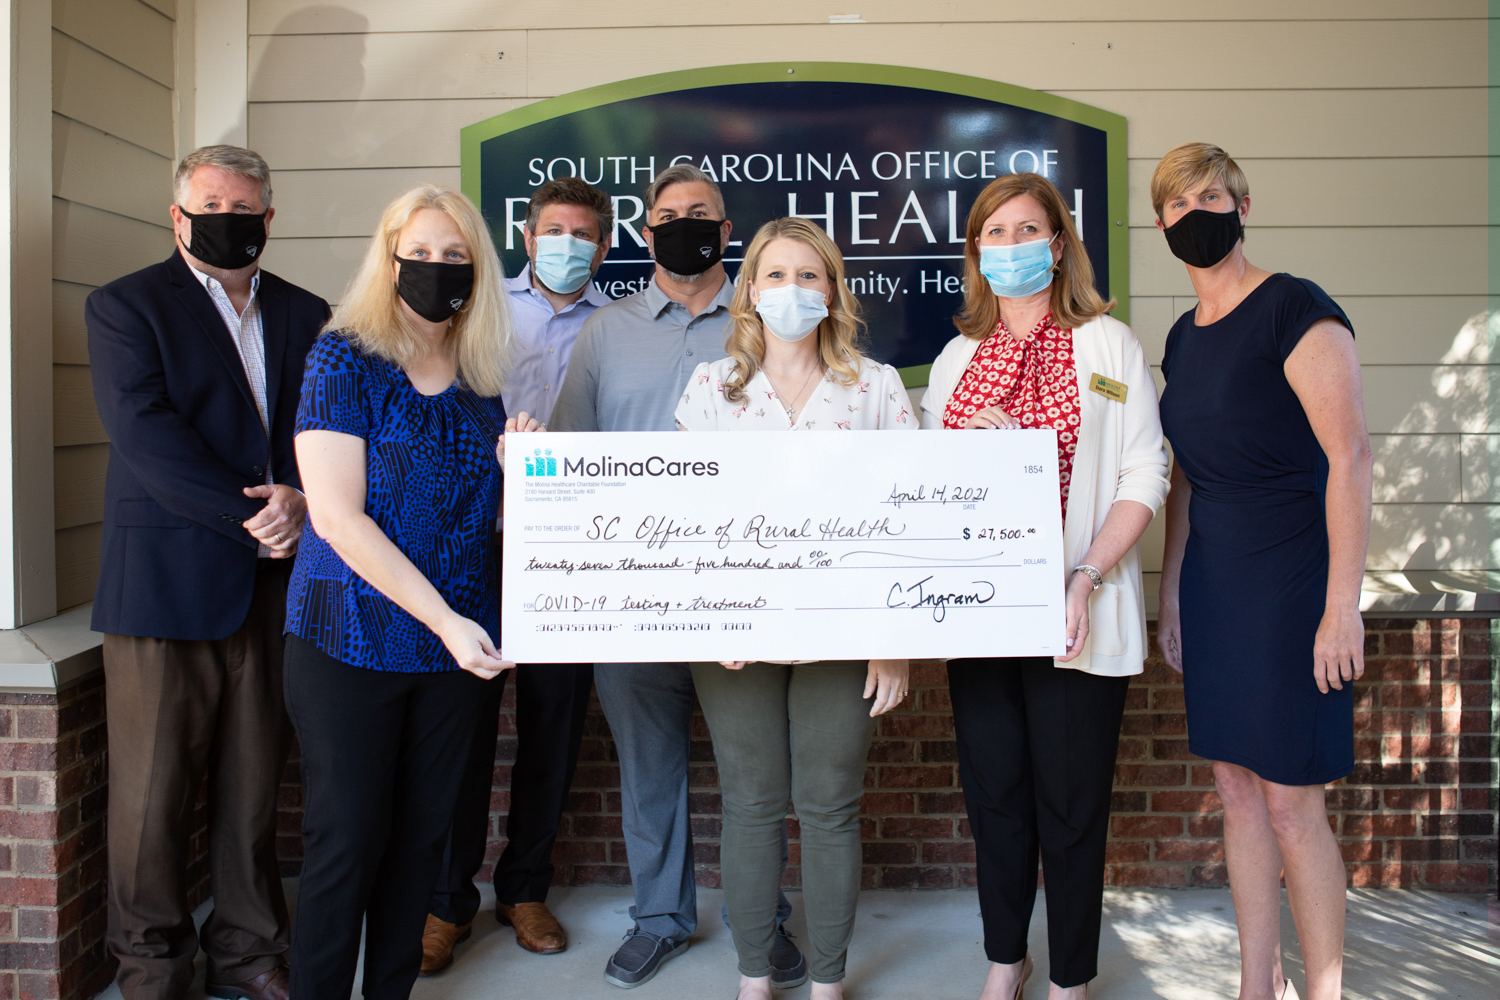 MolinaCares Accord and Molina Healthcare recently donated $27,000 to the S.C. Office of Rural Health. (Photo/Provided)